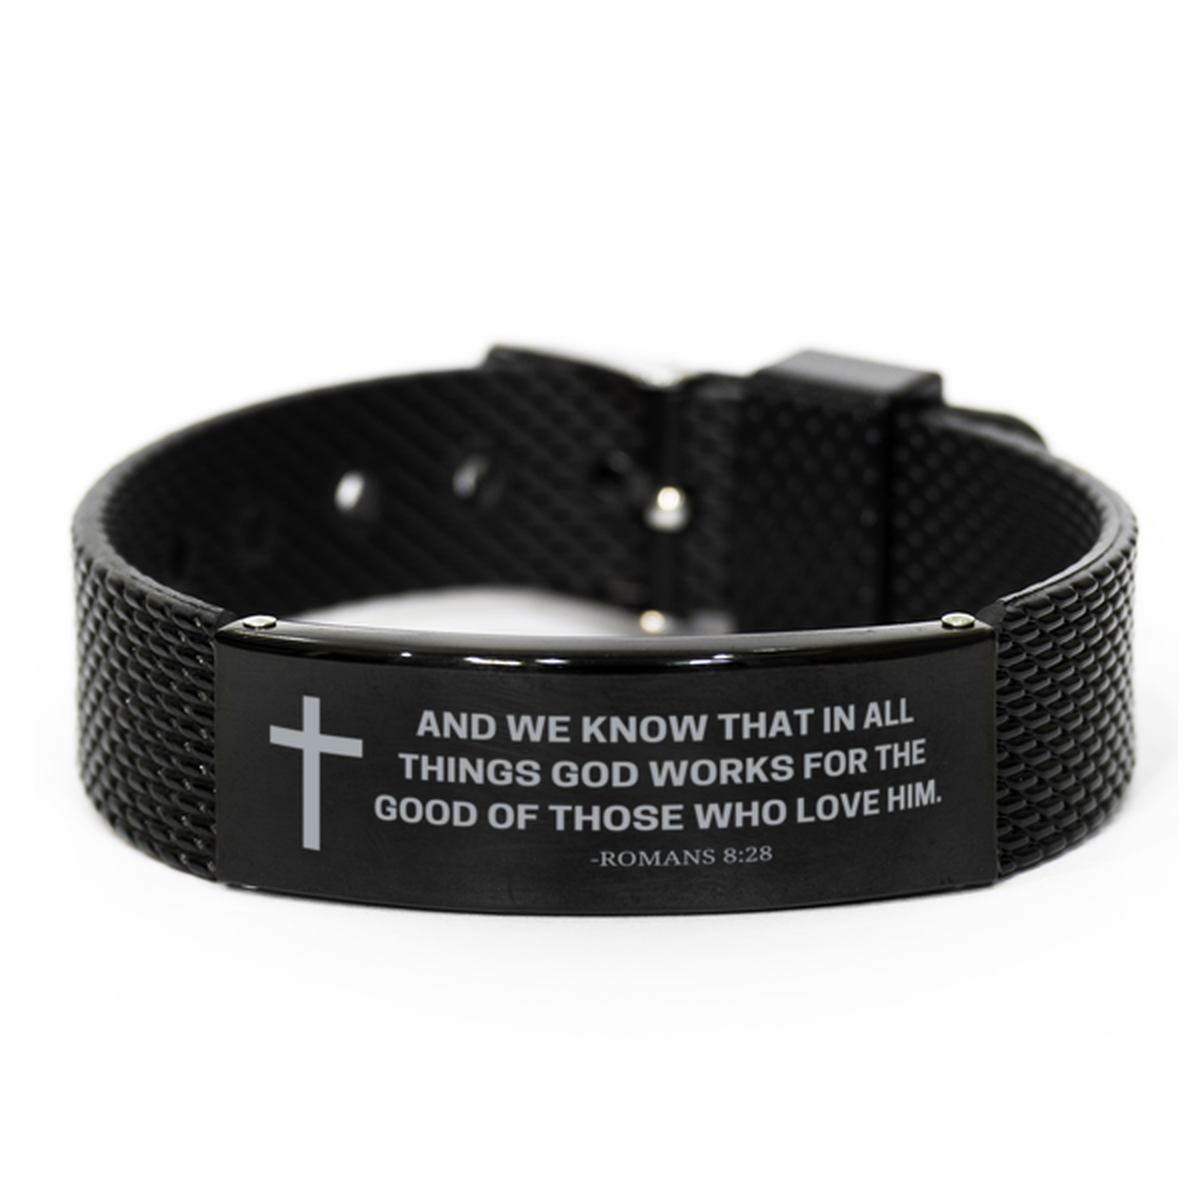 Baptism Gifts For Teenage Boys Girls, Christian Bible Verse Black Shark Mesh Bracelet, And we know that in all things, Catholic Confirmation Gifts for Son, Godson, Grandson, Nephew